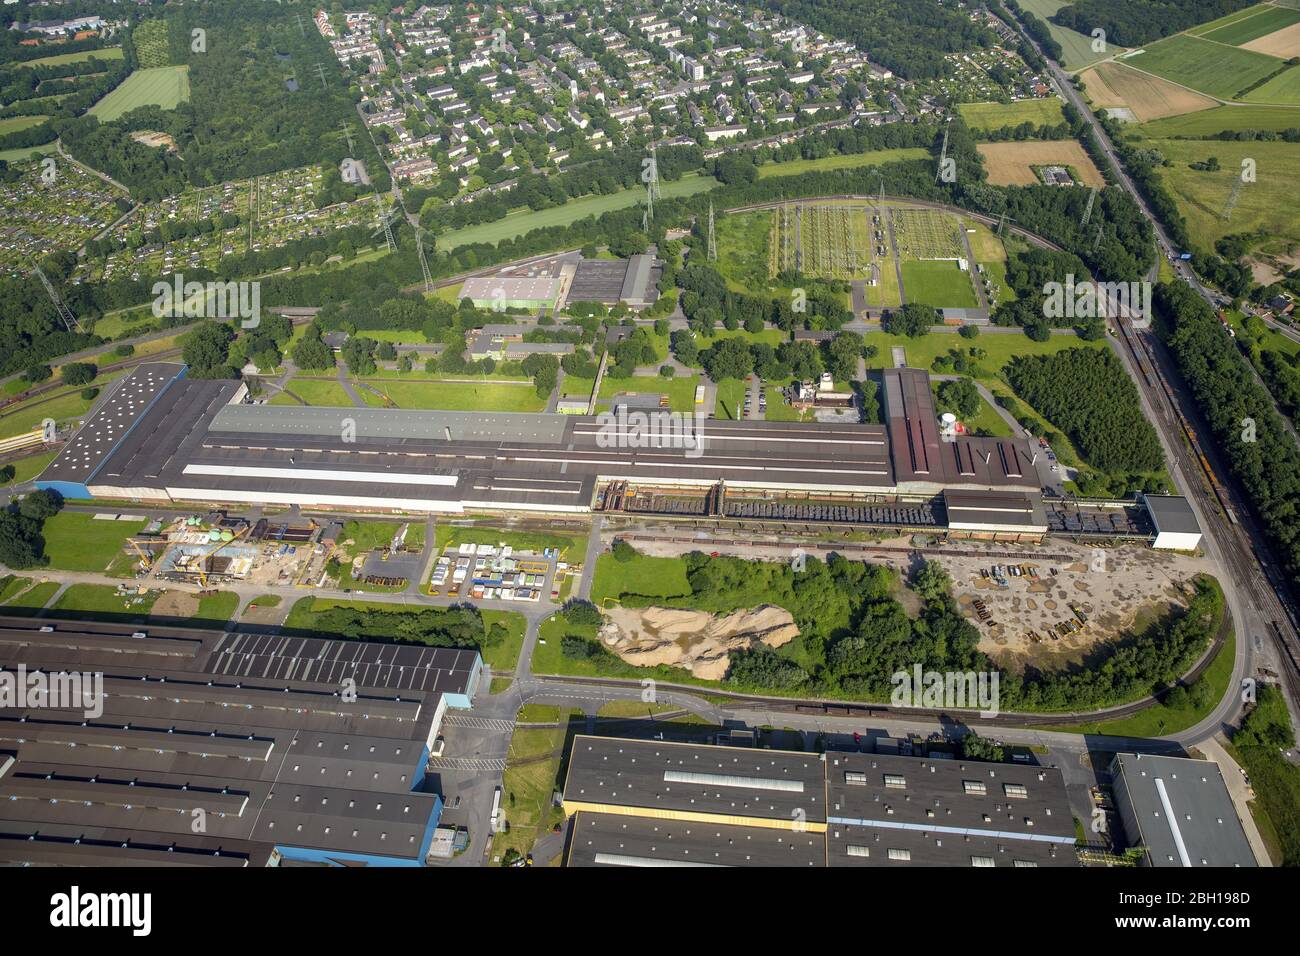 , Technical equipment and production facilities of the steelworks Thyssen Krupp Steel at Mannesmannstrasse in Duisburg, 09.06.2016, aerial view, Germany, North Rhine-Westphalia, Ruhr Area, Duisburg Stock Photo